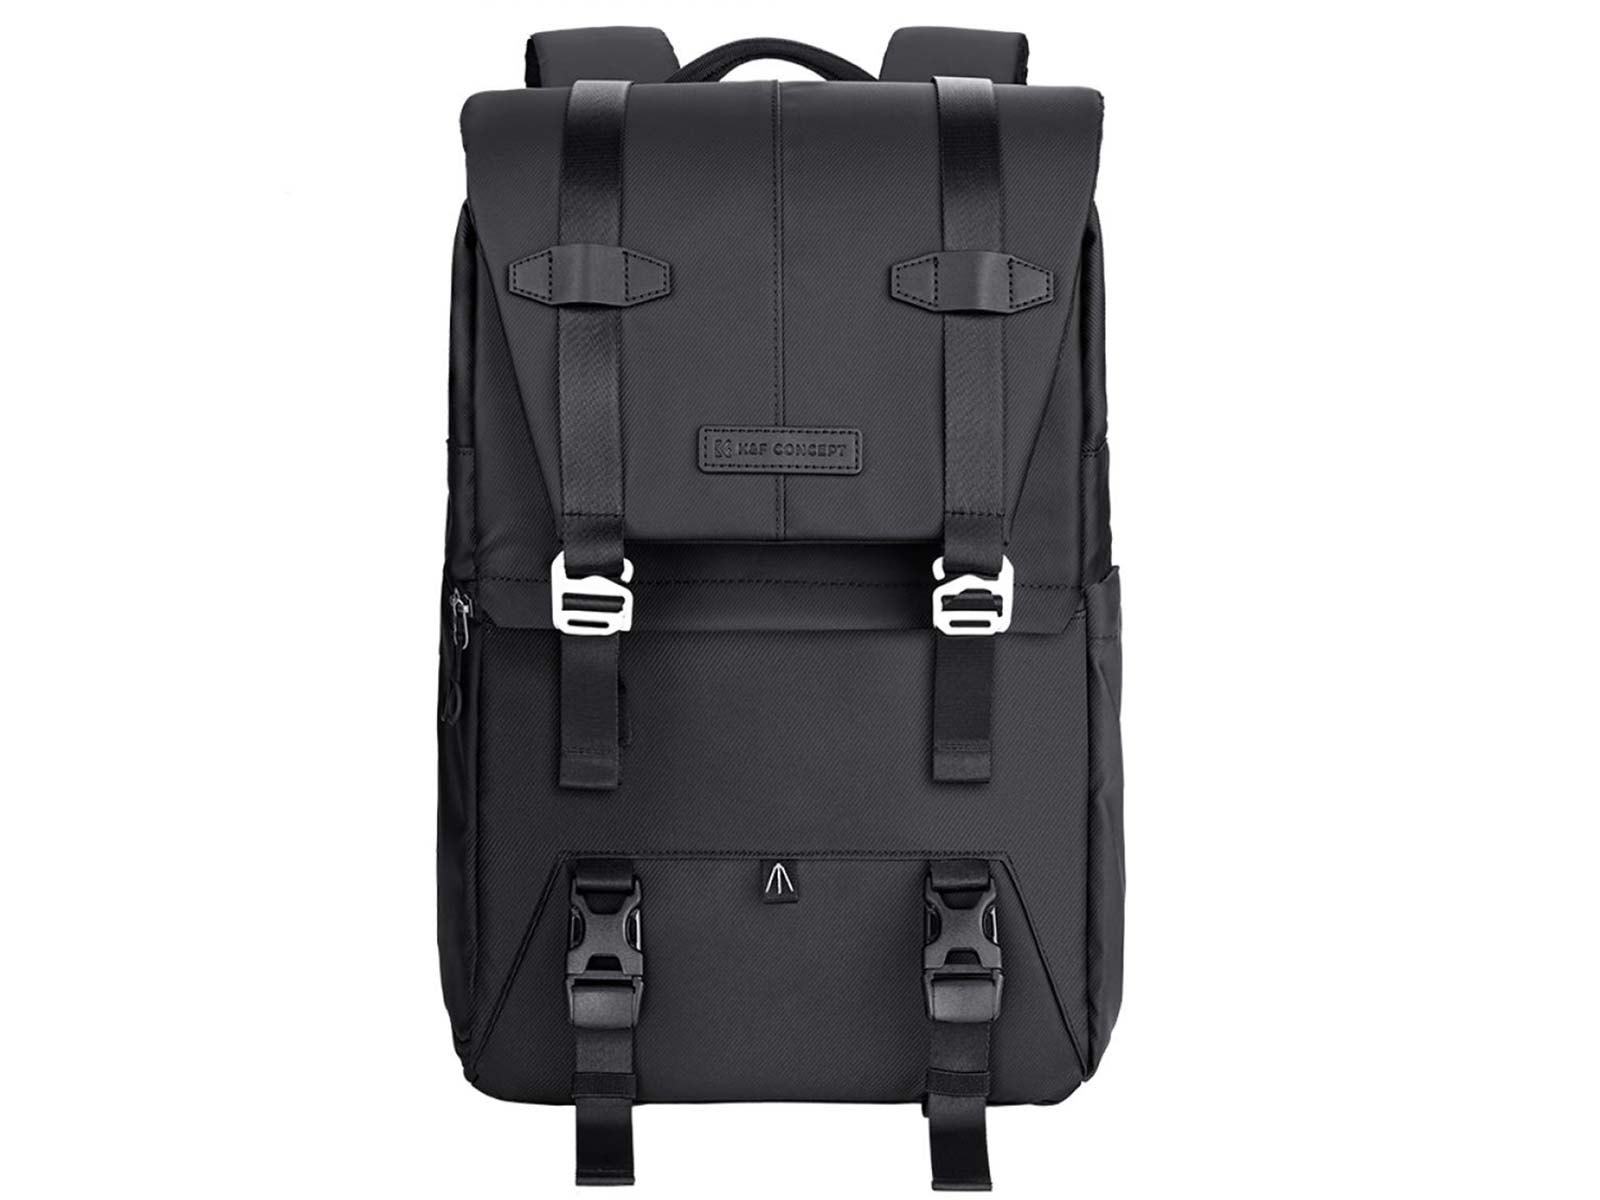 K&F Concept Collapsible Camera Bag 2 Way 22L for Photographers Business  Trip, Travel, Everyday Bag, Black